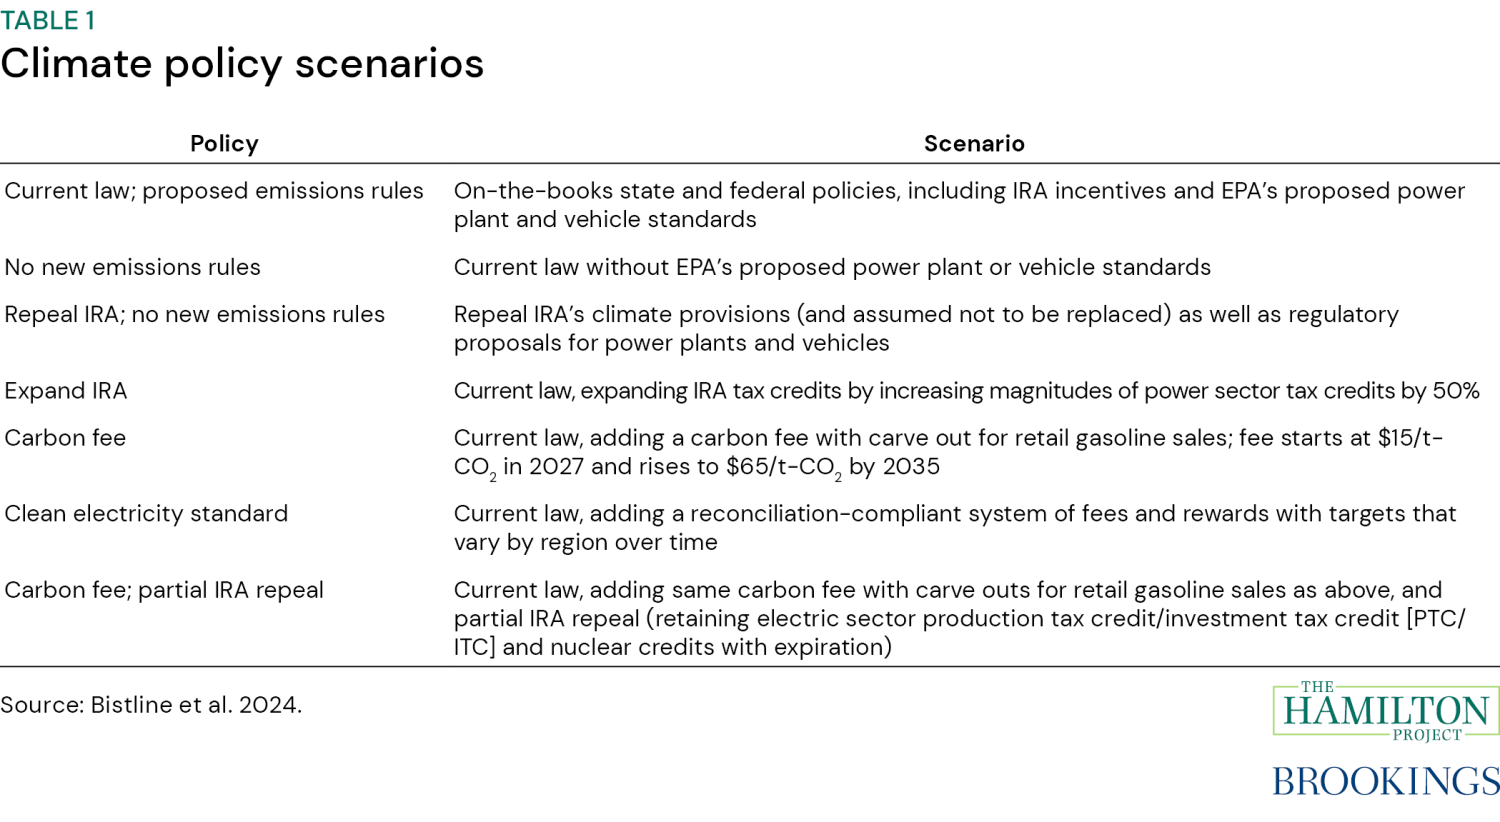 Table 1: Climate policy scenarios with columns for policy and scenario